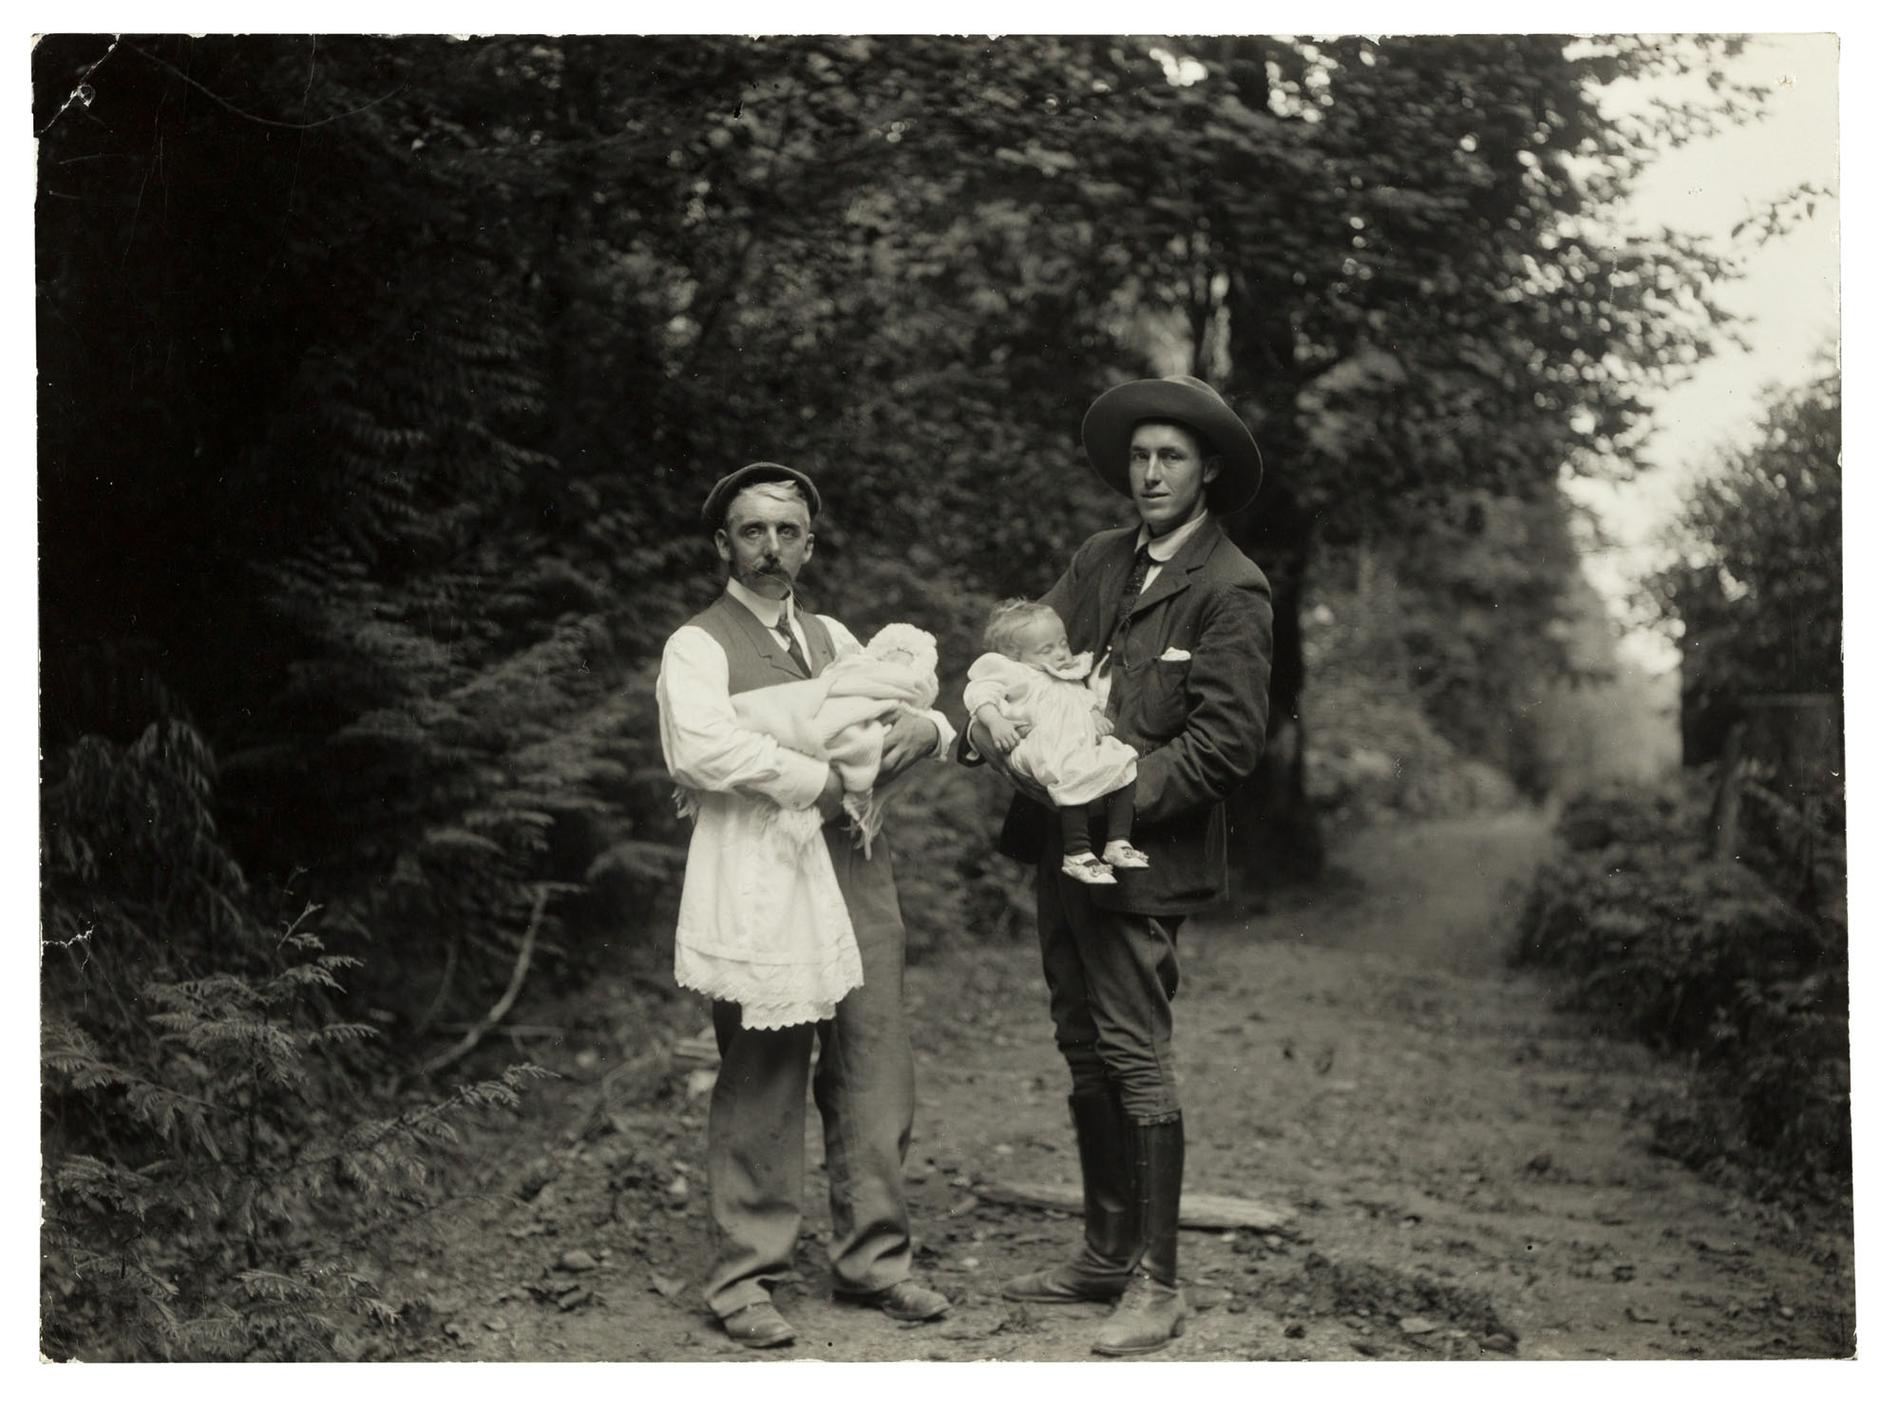 Two men holding babies on a forested path